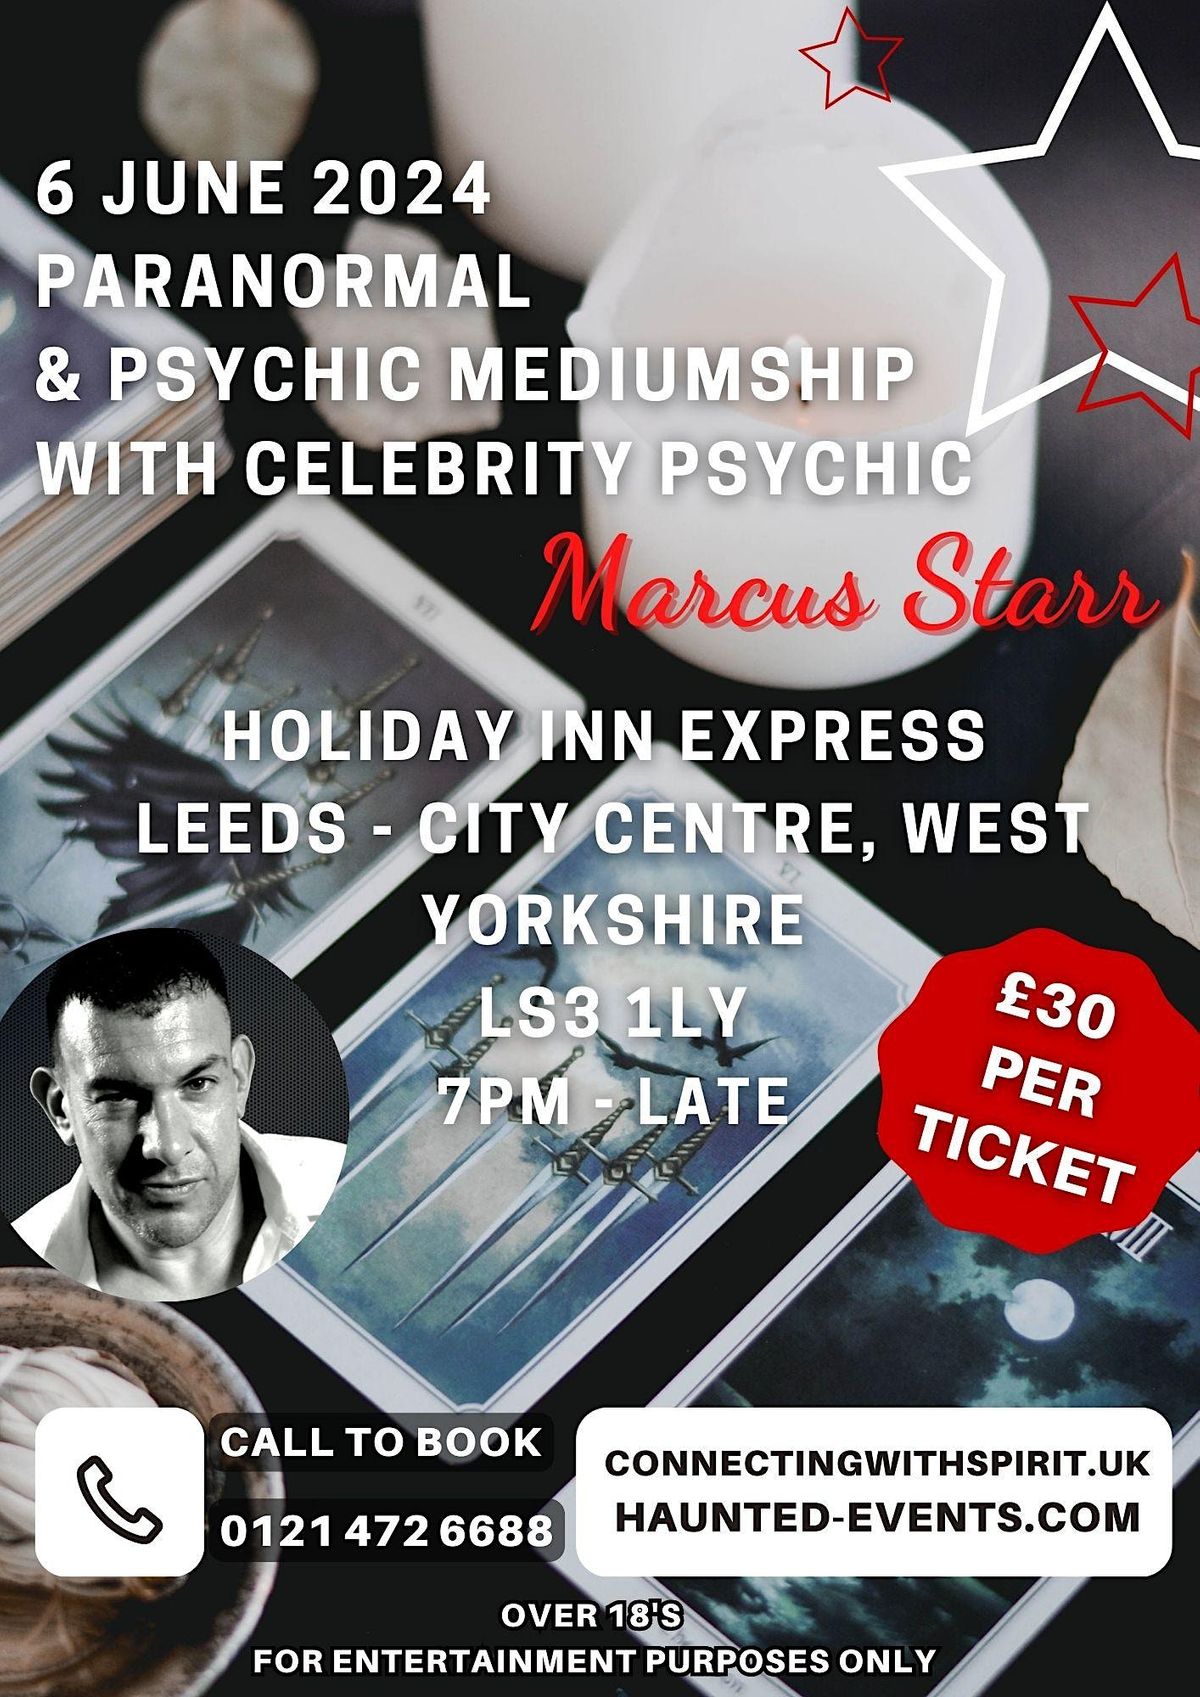 Paranormal & Mediumship with Celebrity Psychic Marcus Starr @ Leeds